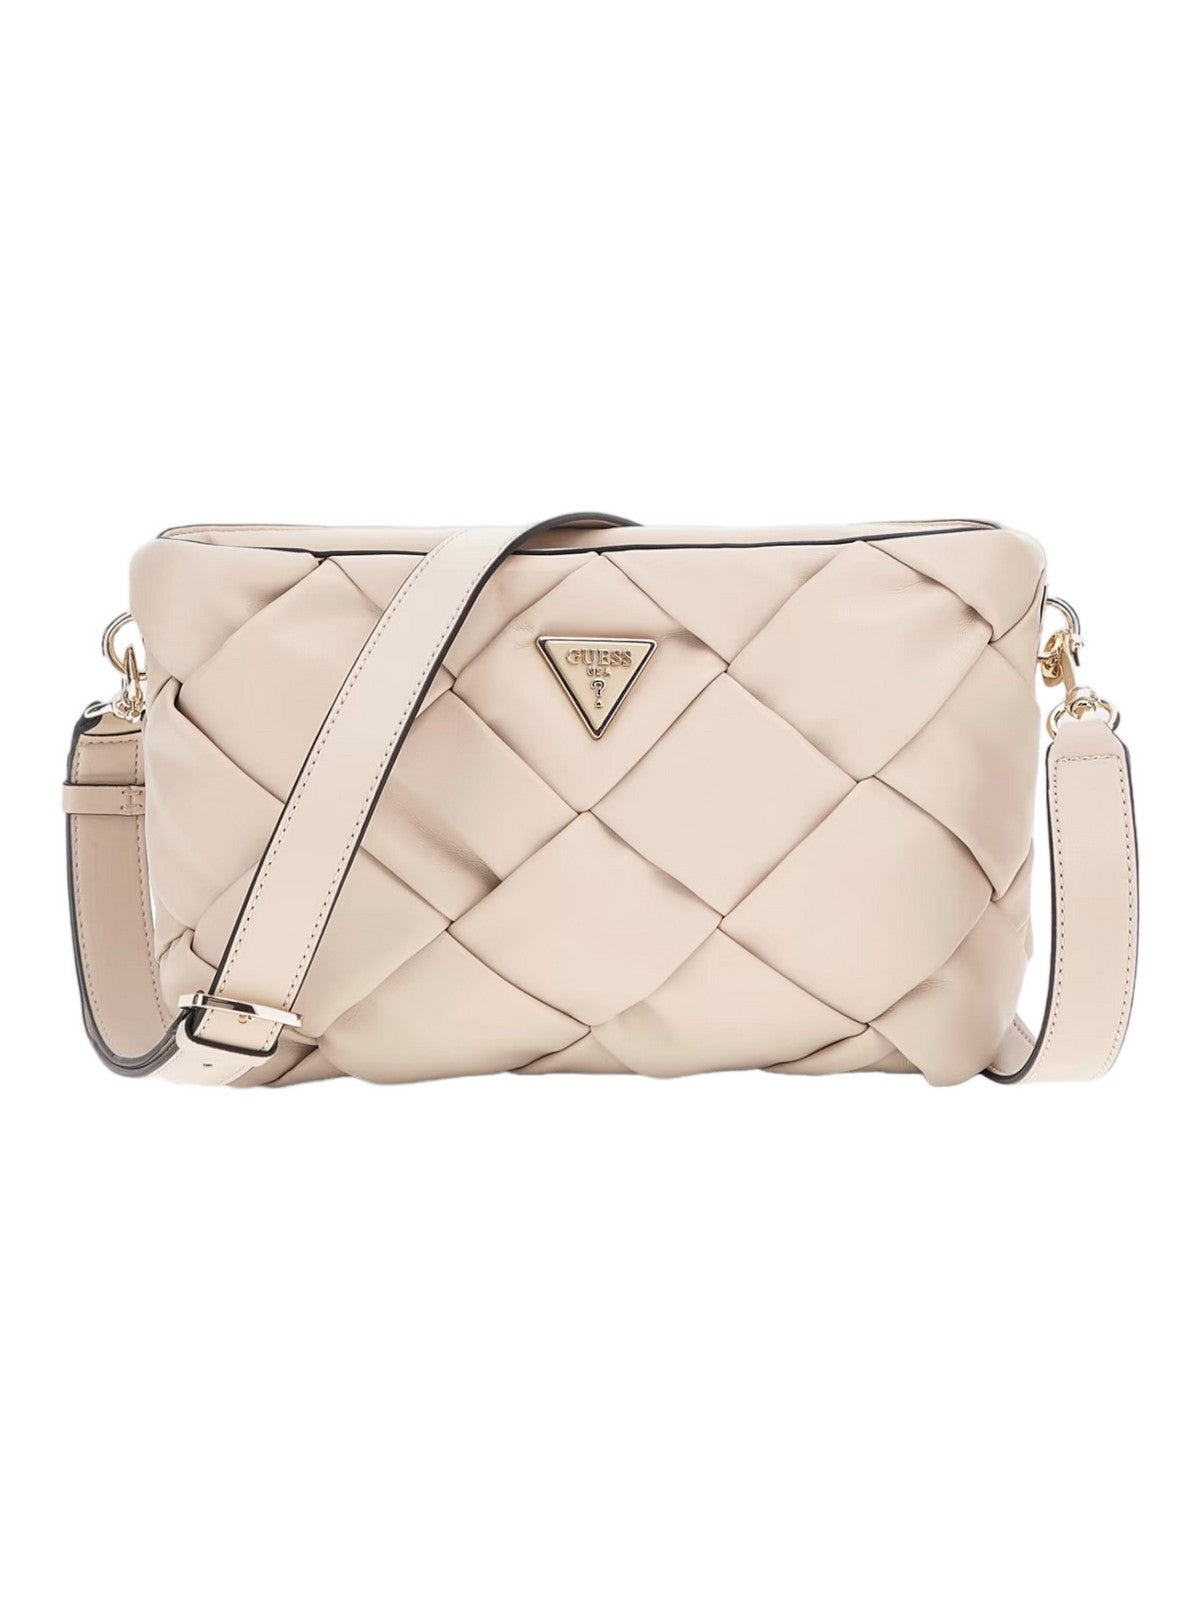 Sac pour femmes GUESS HWWG89 86120 STO Beige